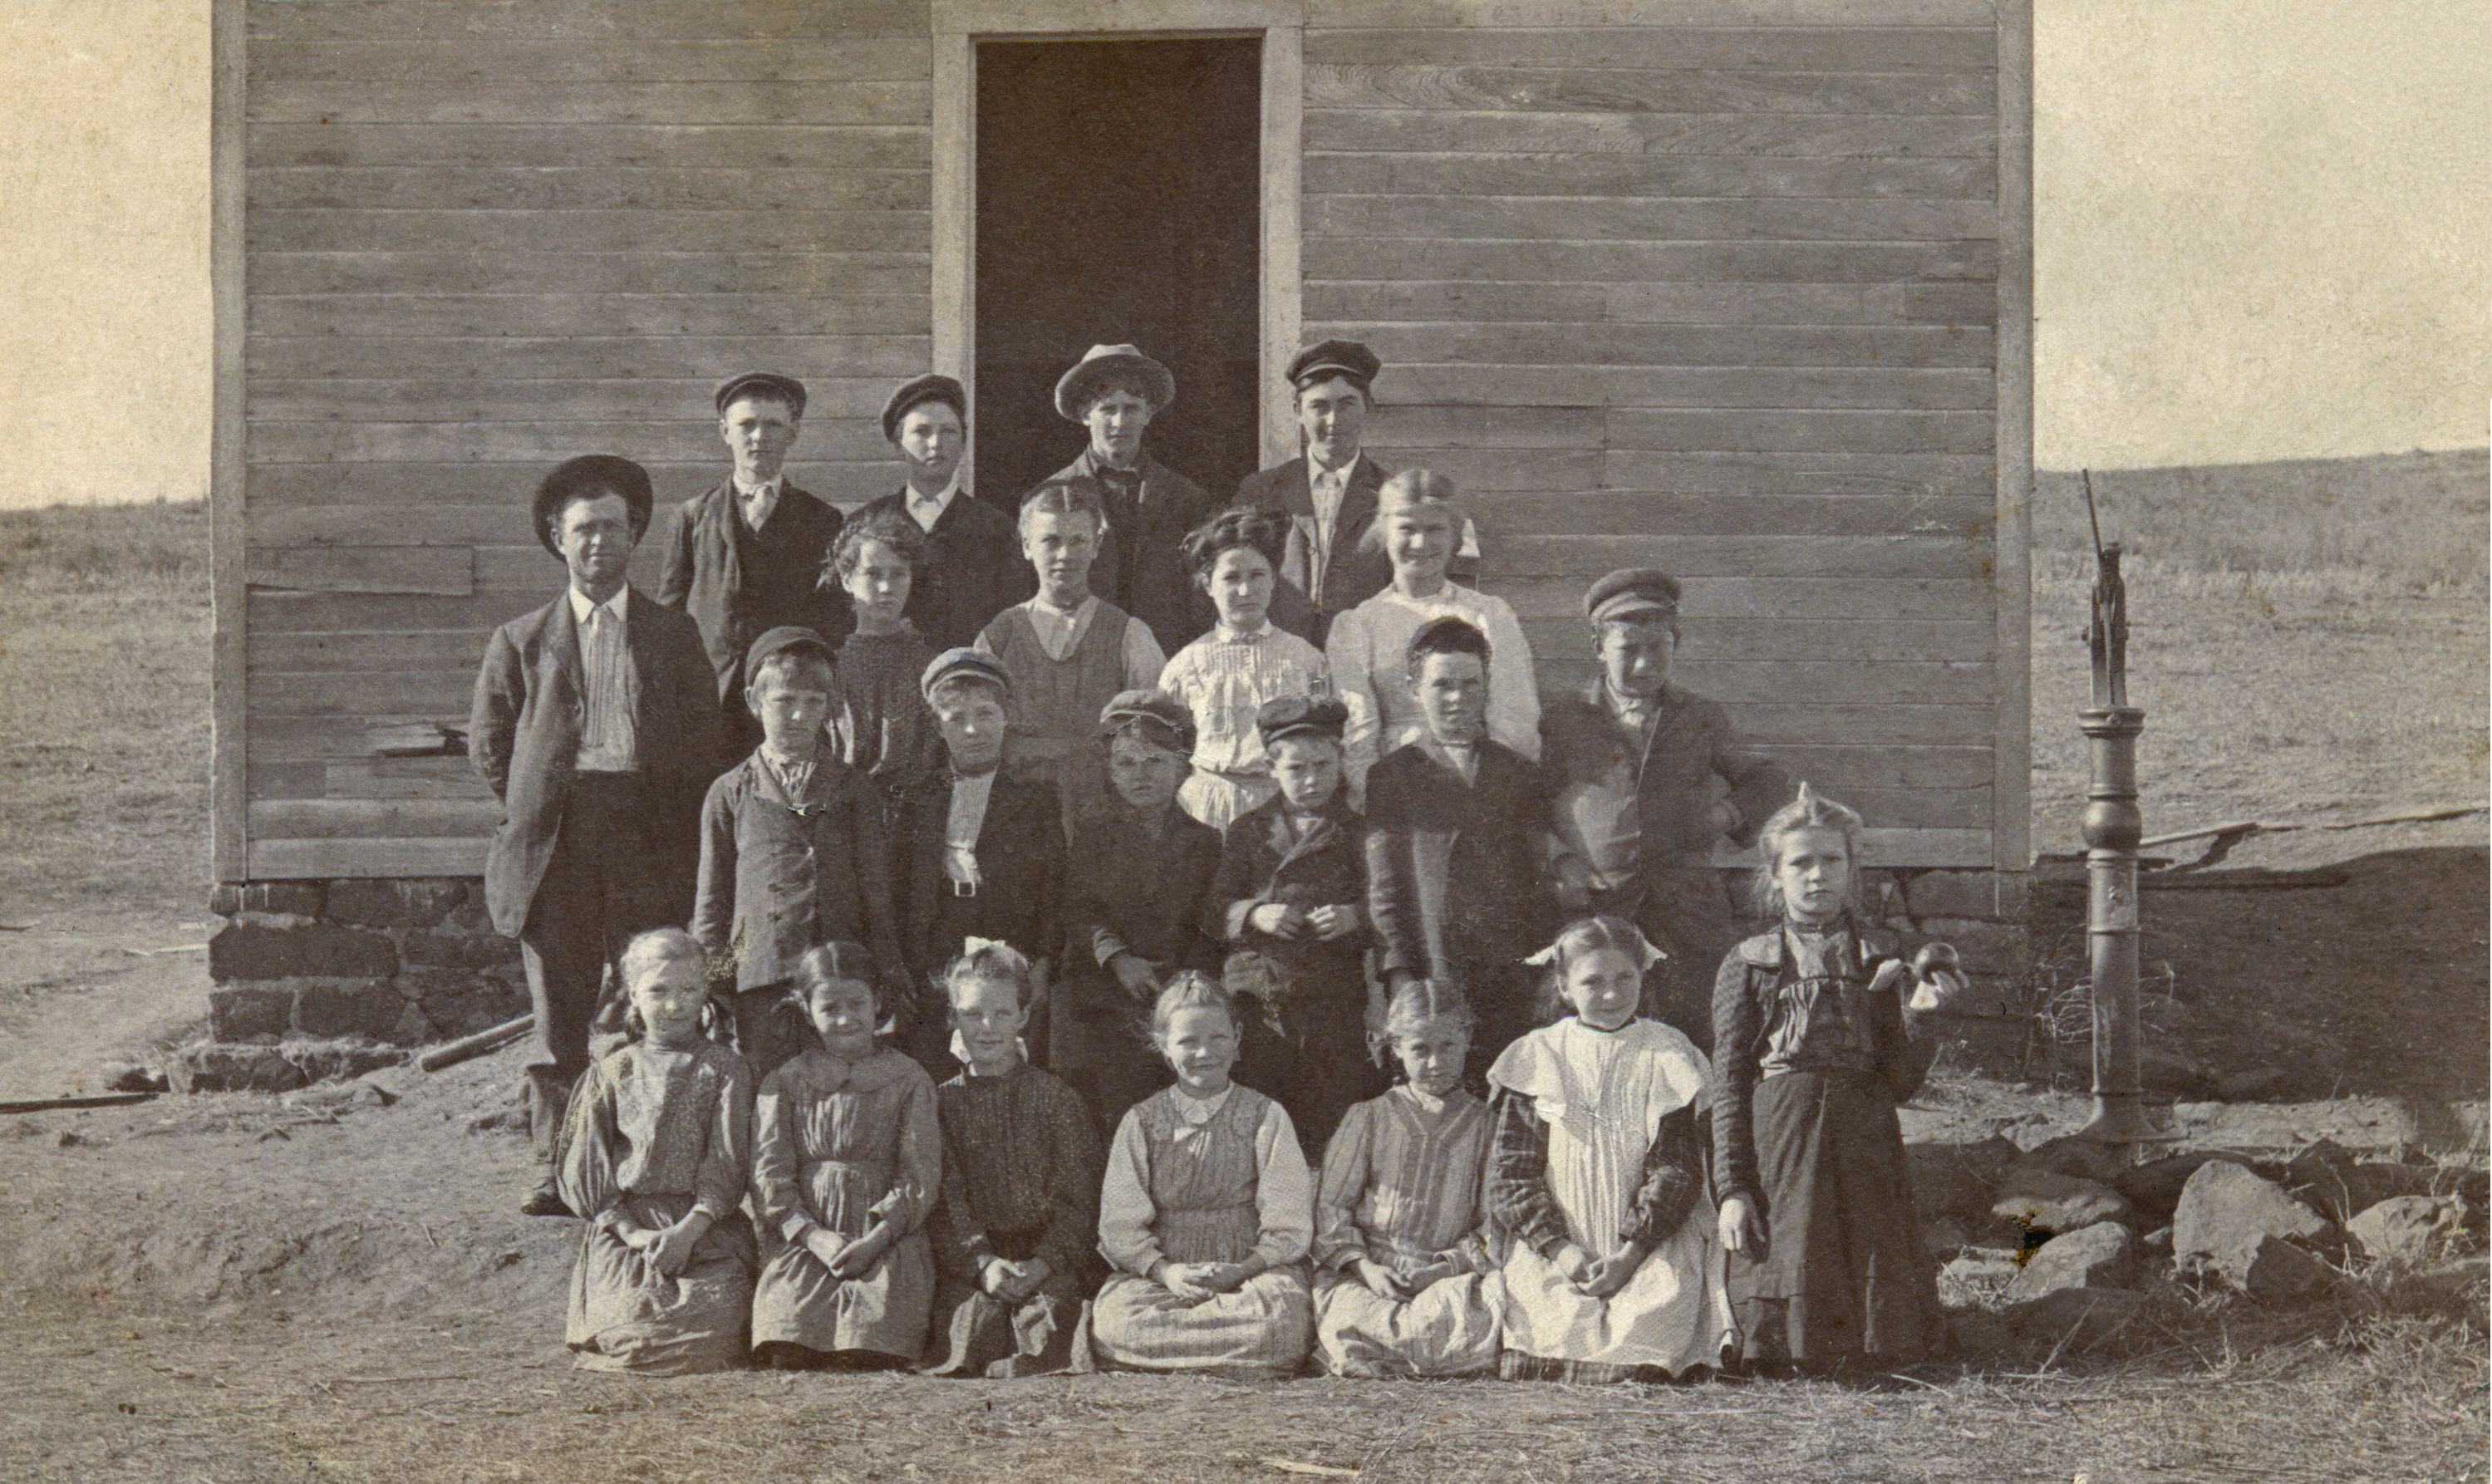 The Oxhide School, circa 1909. Edward is in the second row, second from the left (Note the barren landscape, add some craters and it looks like Mars)